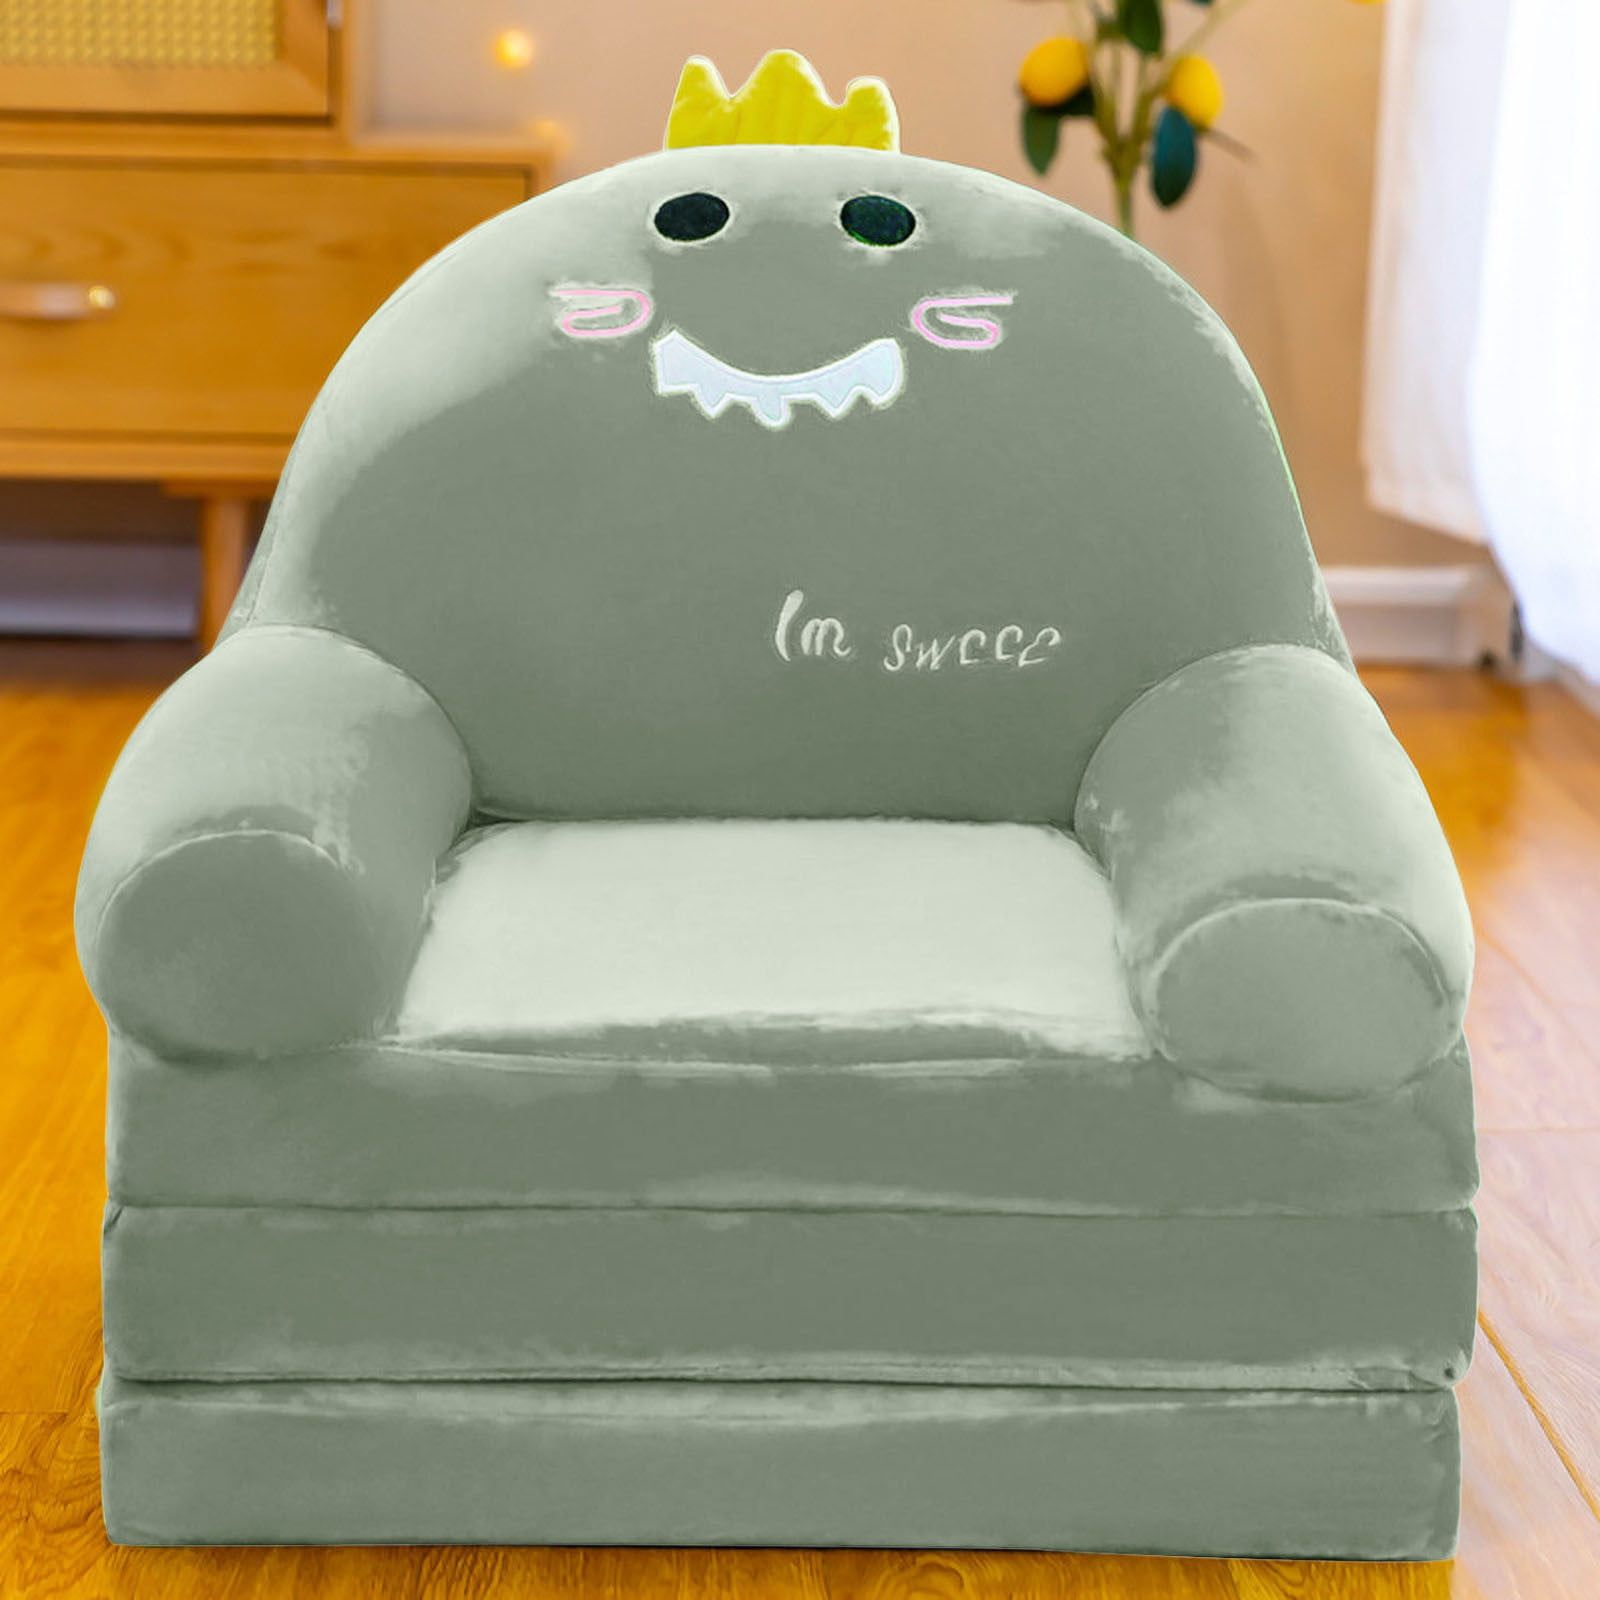 Plush Foldable Kids Sofa Backrest 2 In 1 Foldable Sofa Cute Cartoon Within 2 In 1 Foldable Sofas (View 19 of 20)